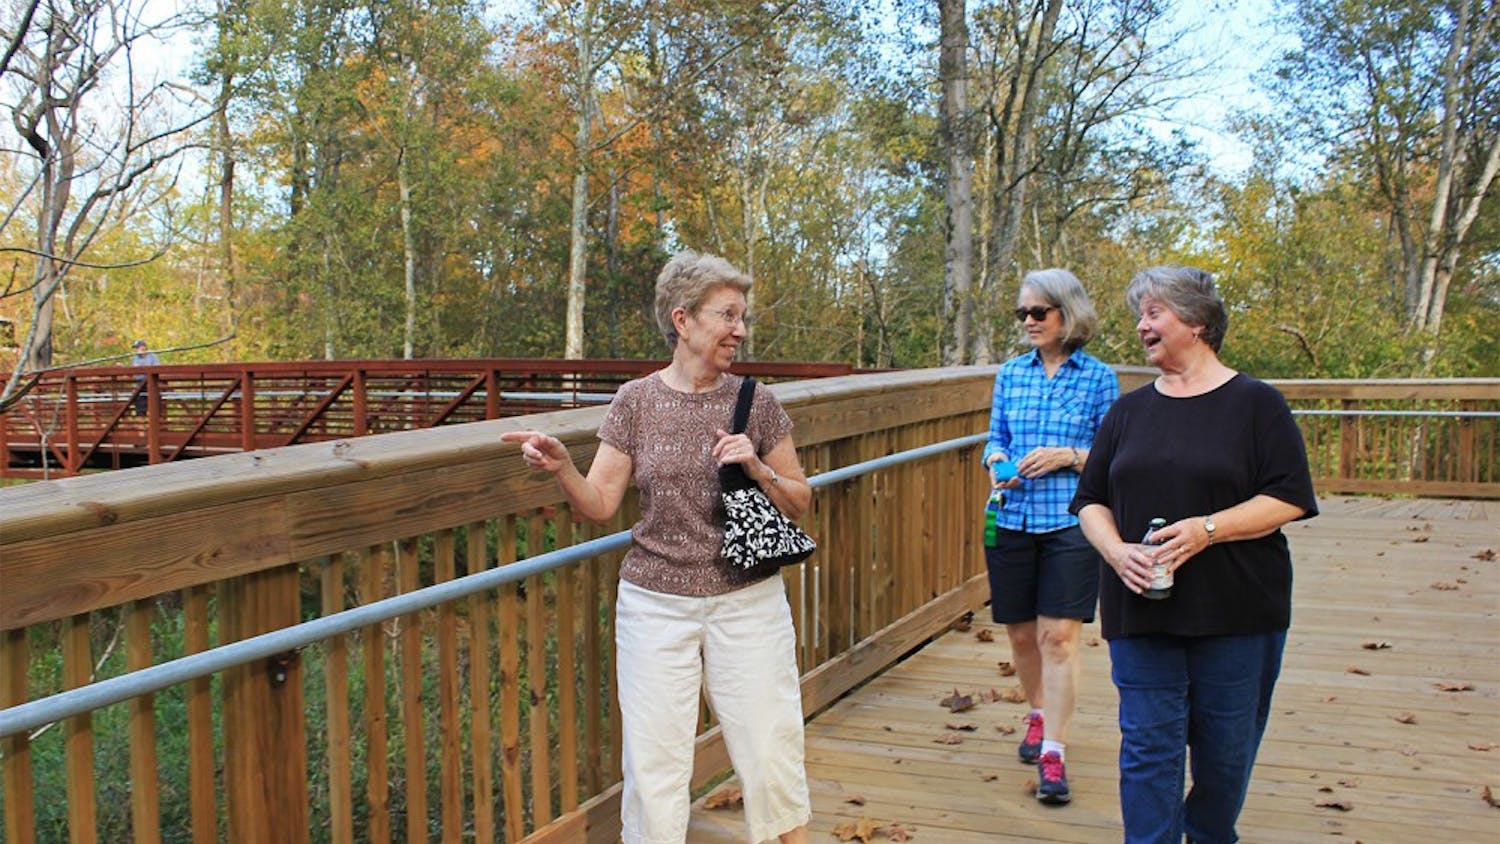 Locals Jan Irwin, Dail White, and Ivy Bishop went walking in Hillsborough Tuesday afternoon, exploring the town's recently constructed Riverwalk. Irwin commented on the new installation, "I just could not believe how well constructed it was...it just blew me away."